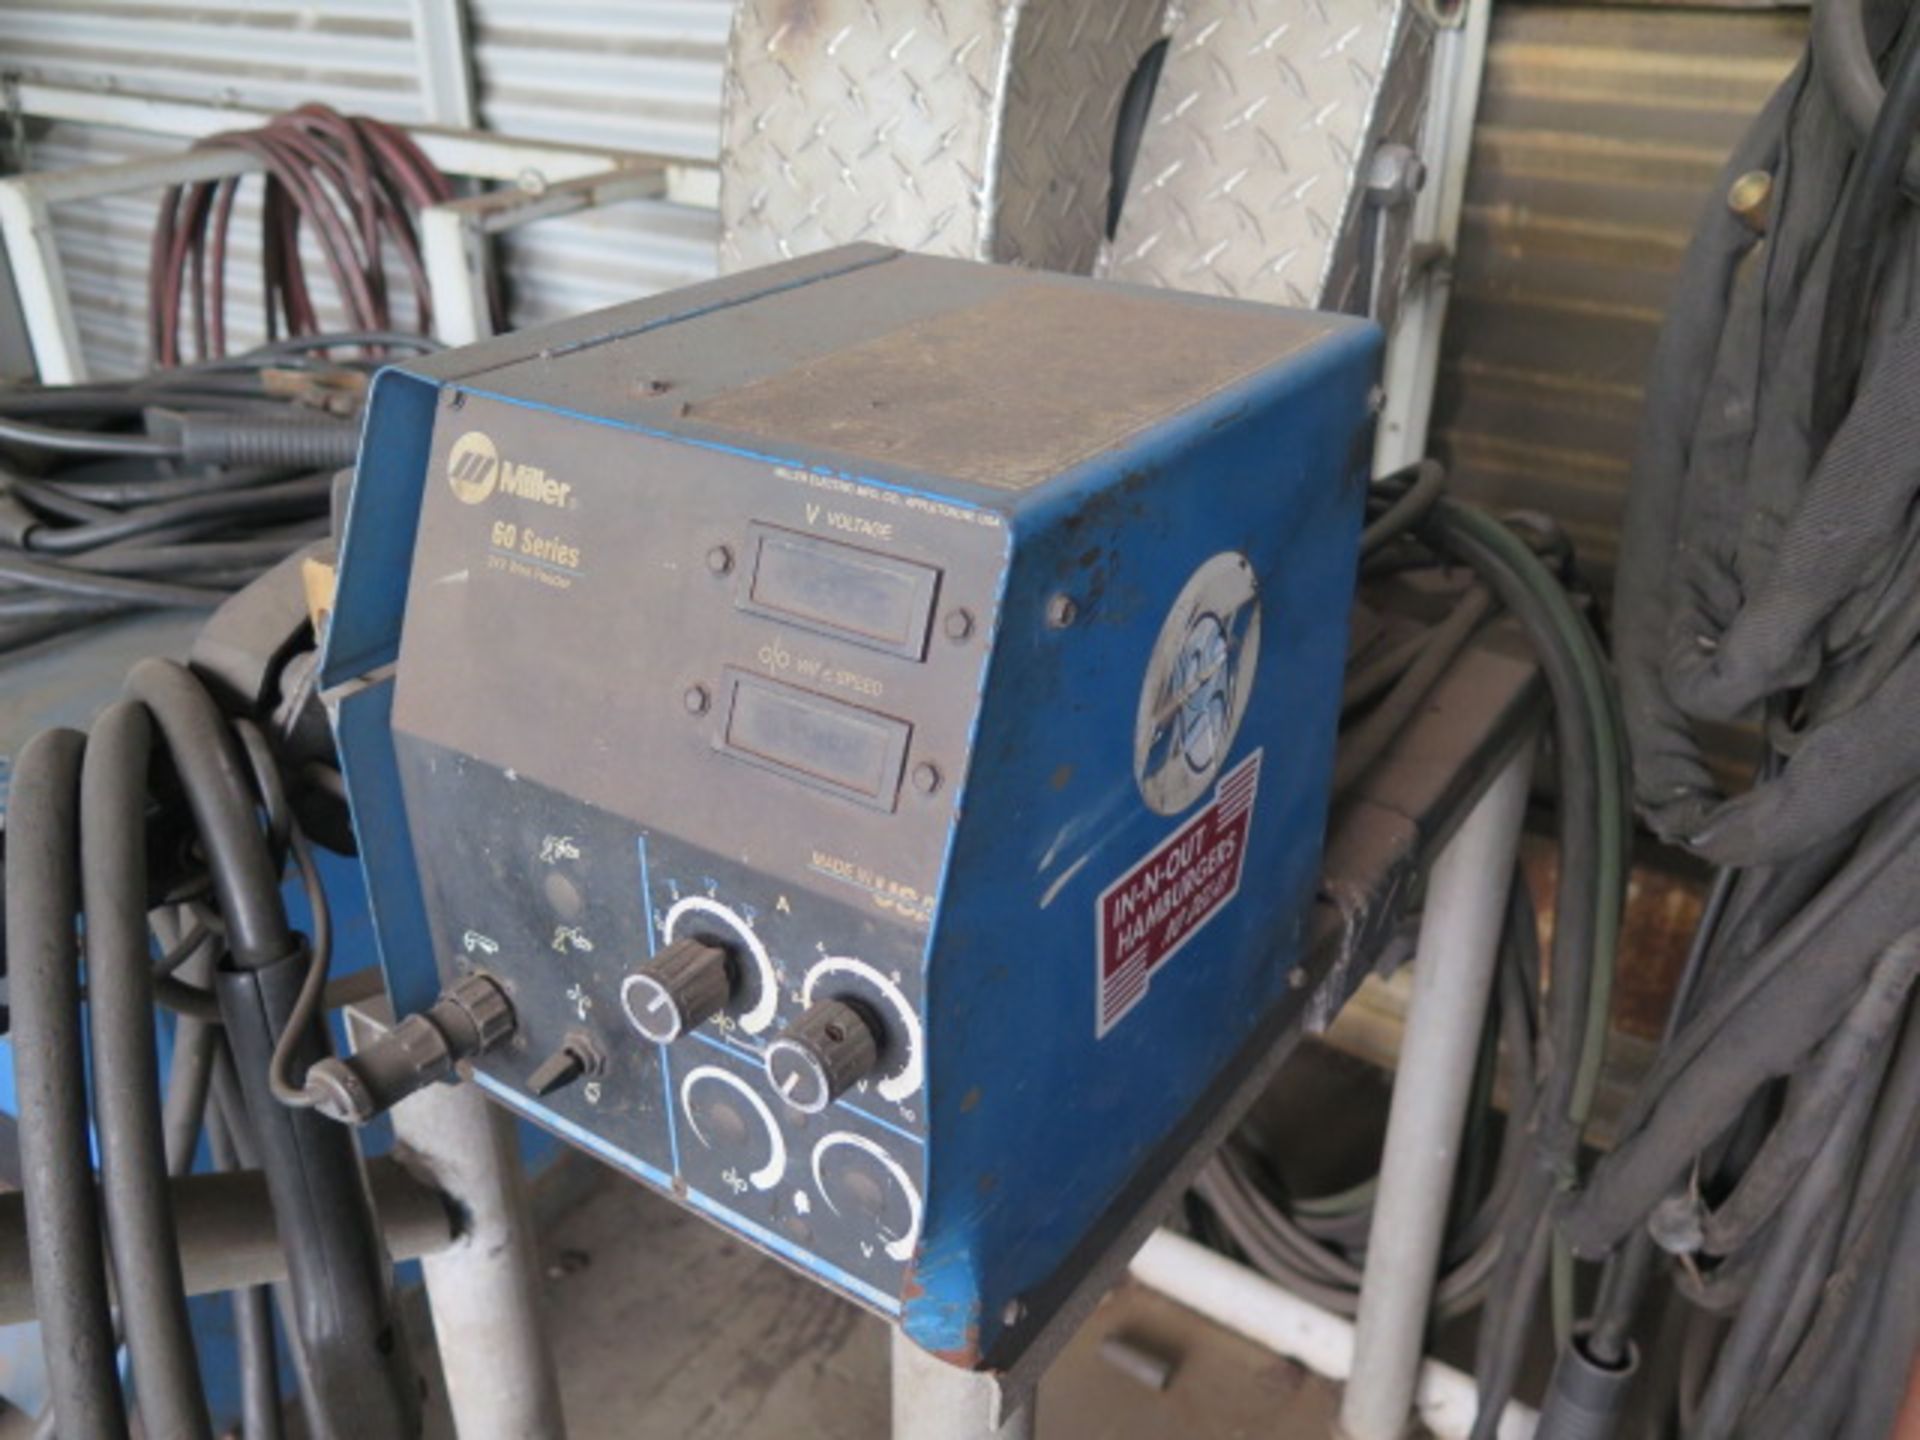 Miller Syncrowave 250 CC-AC/DC Arc Welding Power Source s/n KJ220846 w/ Miller 60-Series Wire - Image 4 of 6